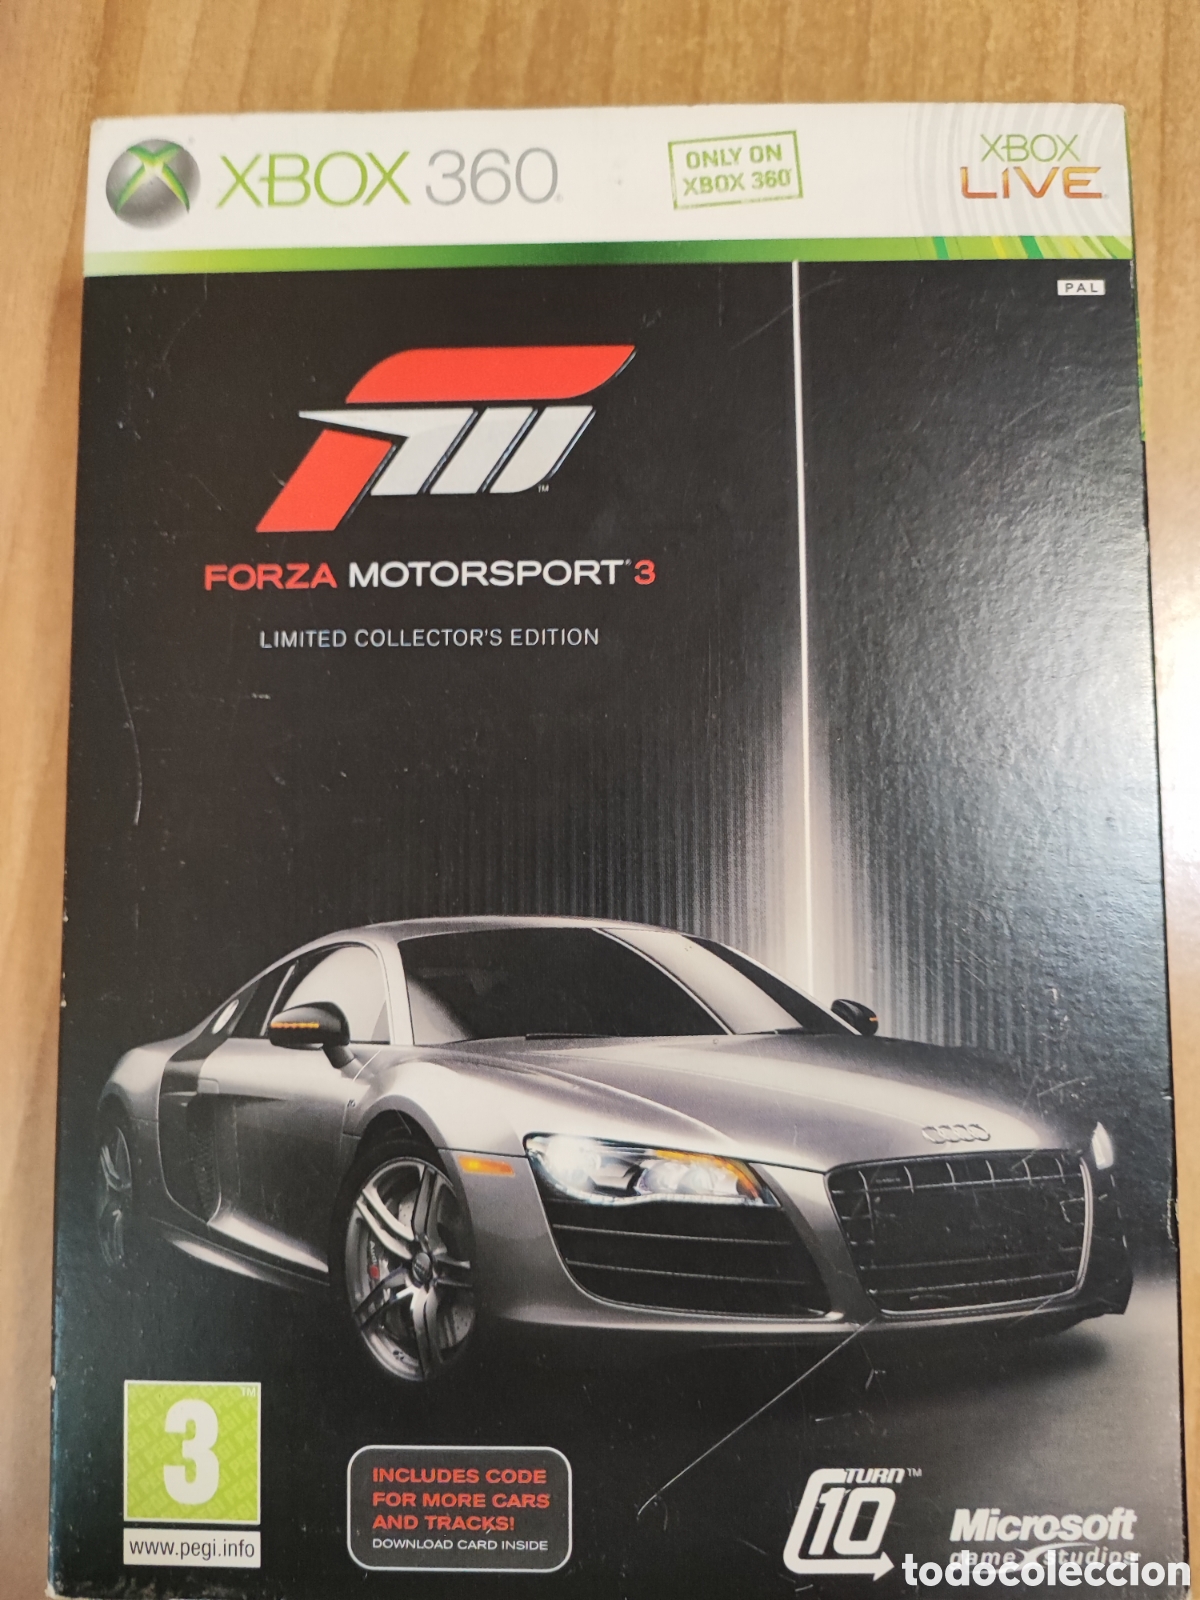 XBOX 360 Forza Motorsport 4 Limited Collector's Edition - NTSC